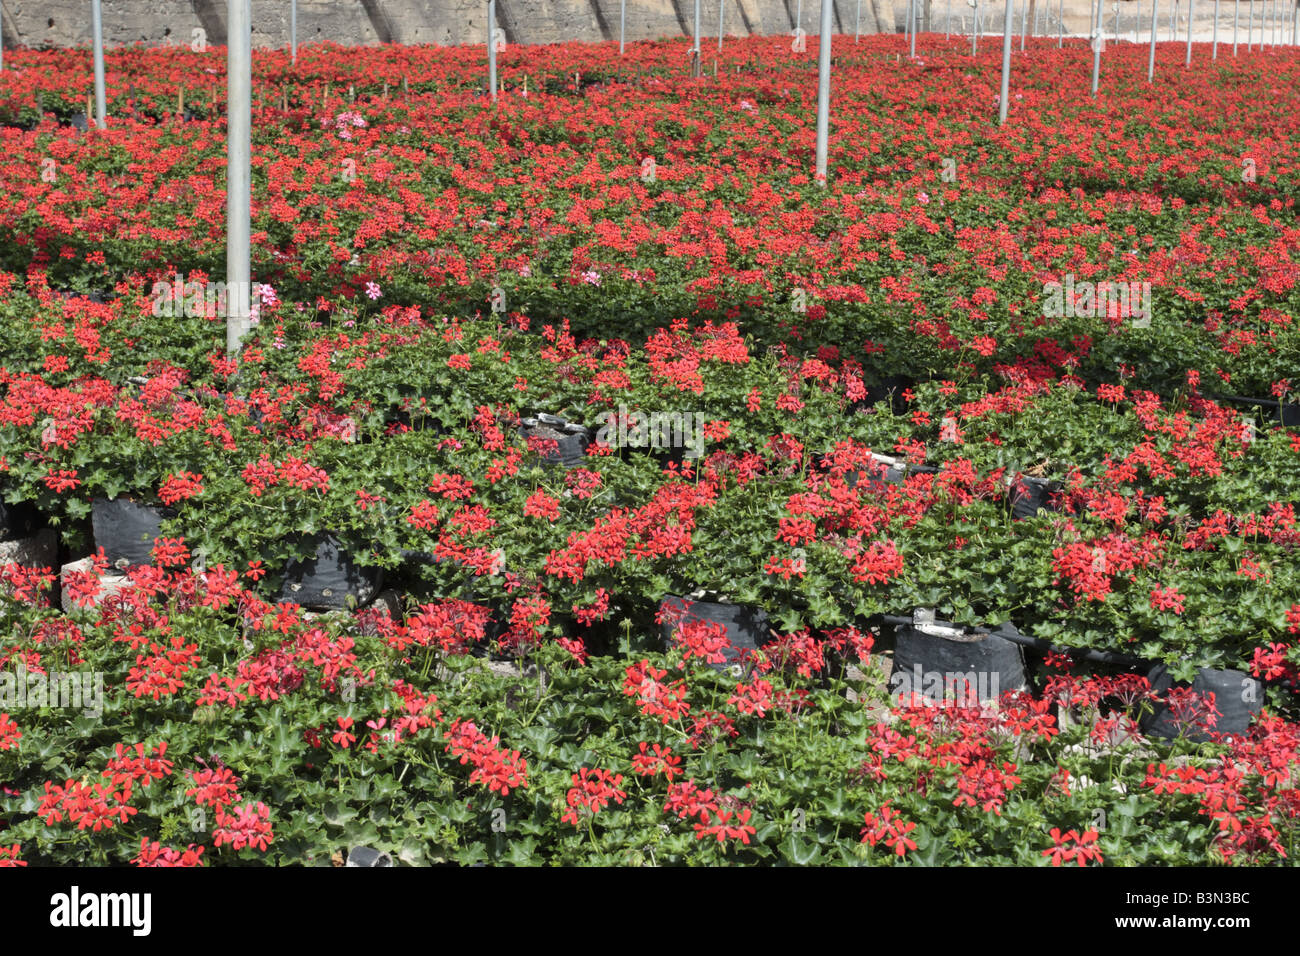 Thousands of red geraniums being grown for sale through garden centres at Aguadulce Tenerife Canary Islands Spain Stock Photo